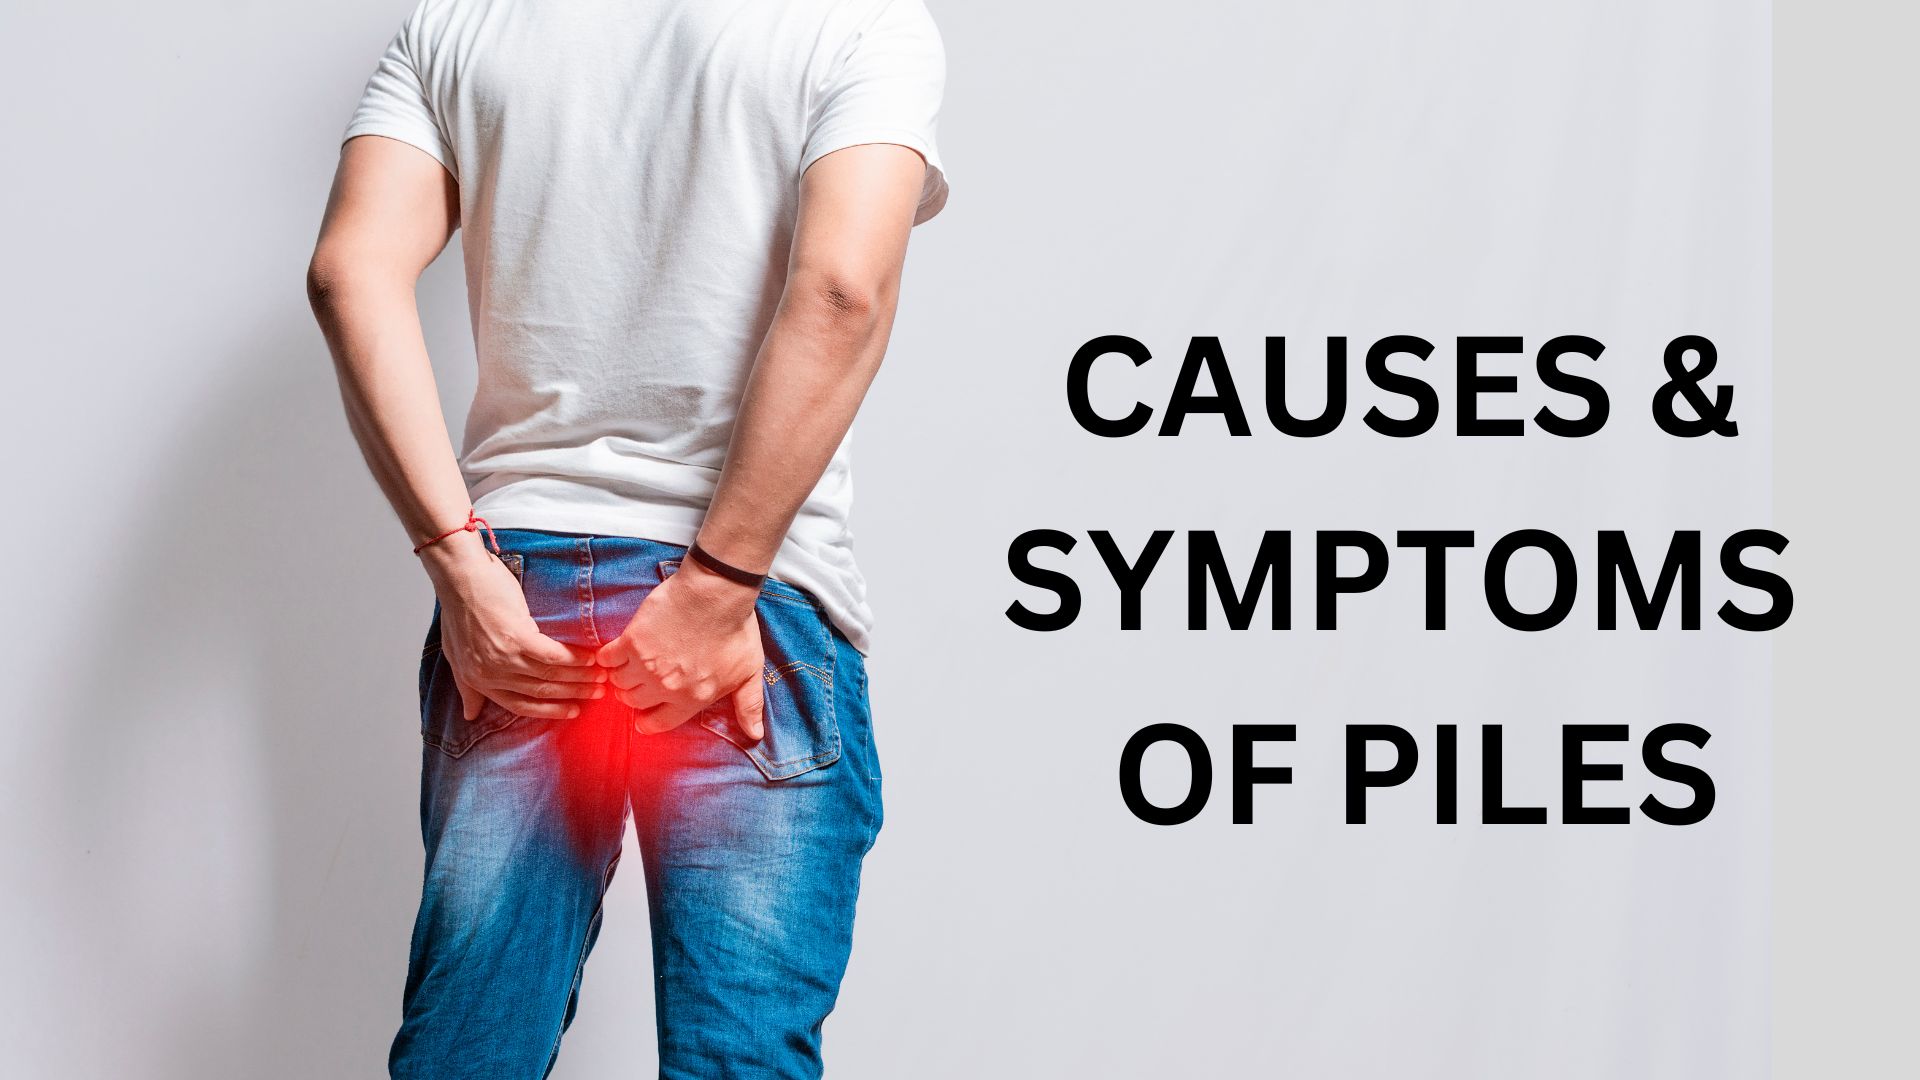 Common causes and symptoms of piles, and their treatment